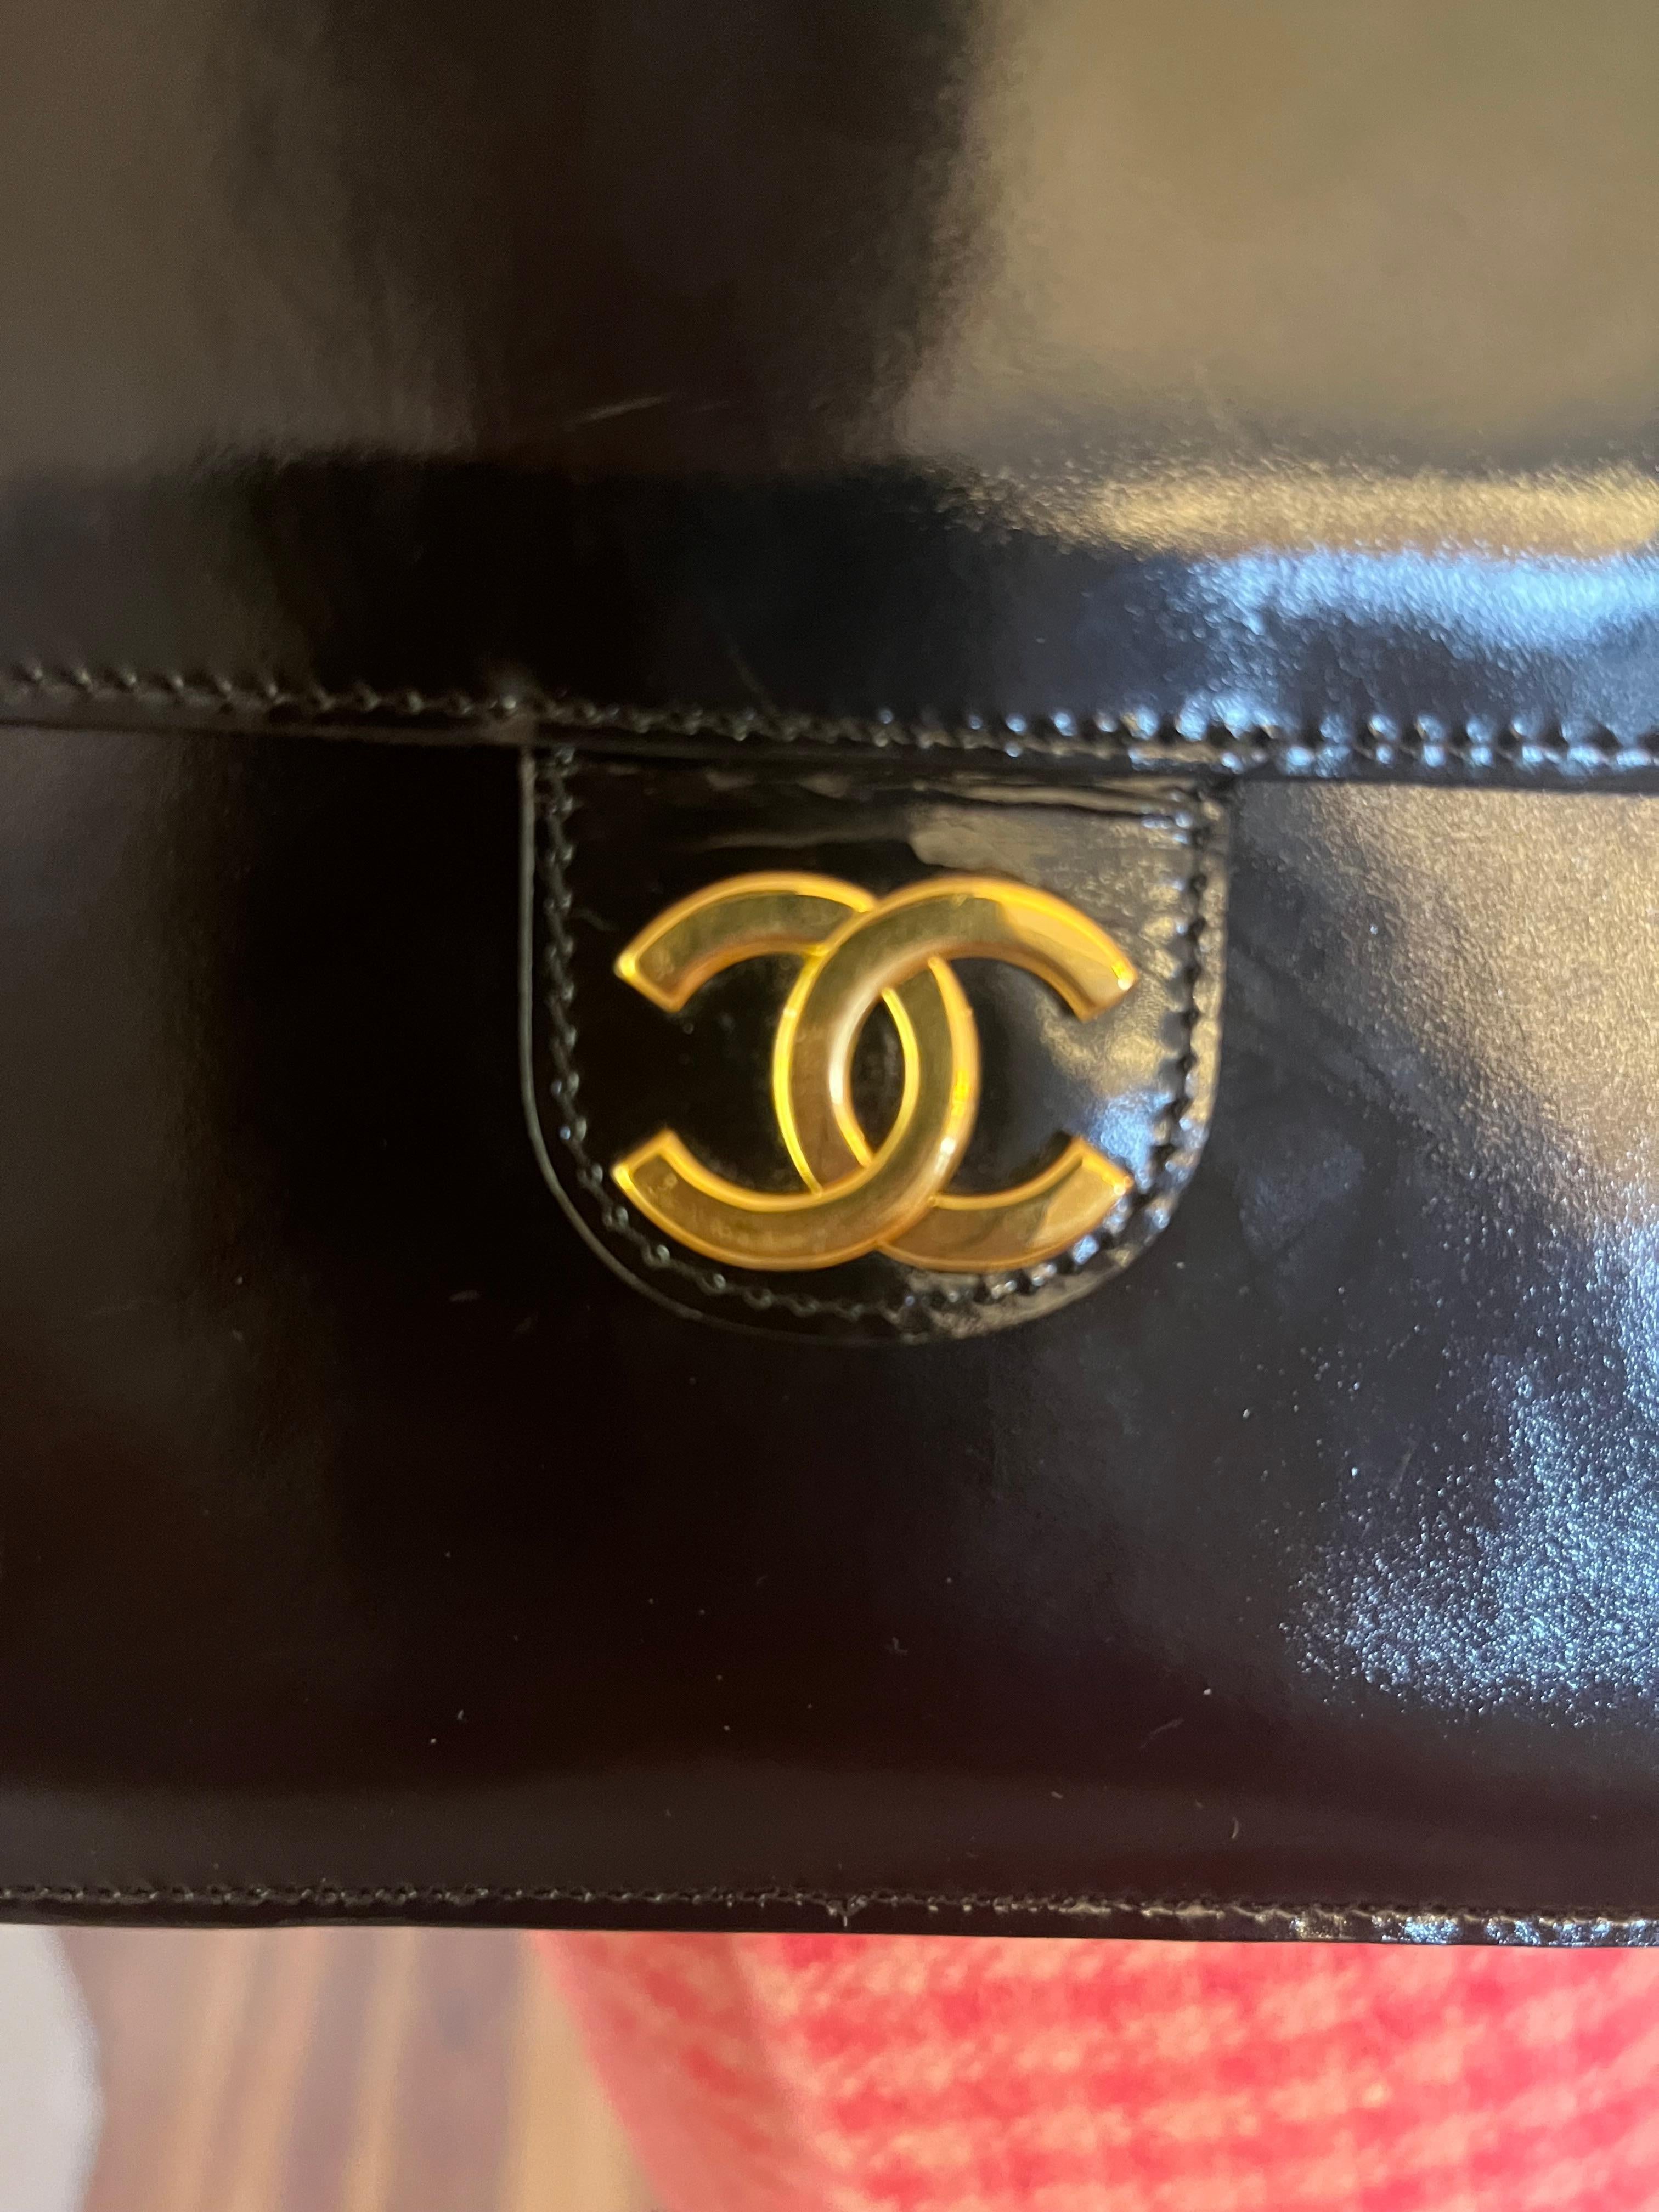 What a classic! This vintage 1986-88 black patent leather has a push lock closure. It is in amazing condition given its age with only a few minor scratches on the lining. The lining is a nice soft leather.
As we all know Chanel handbag prices have